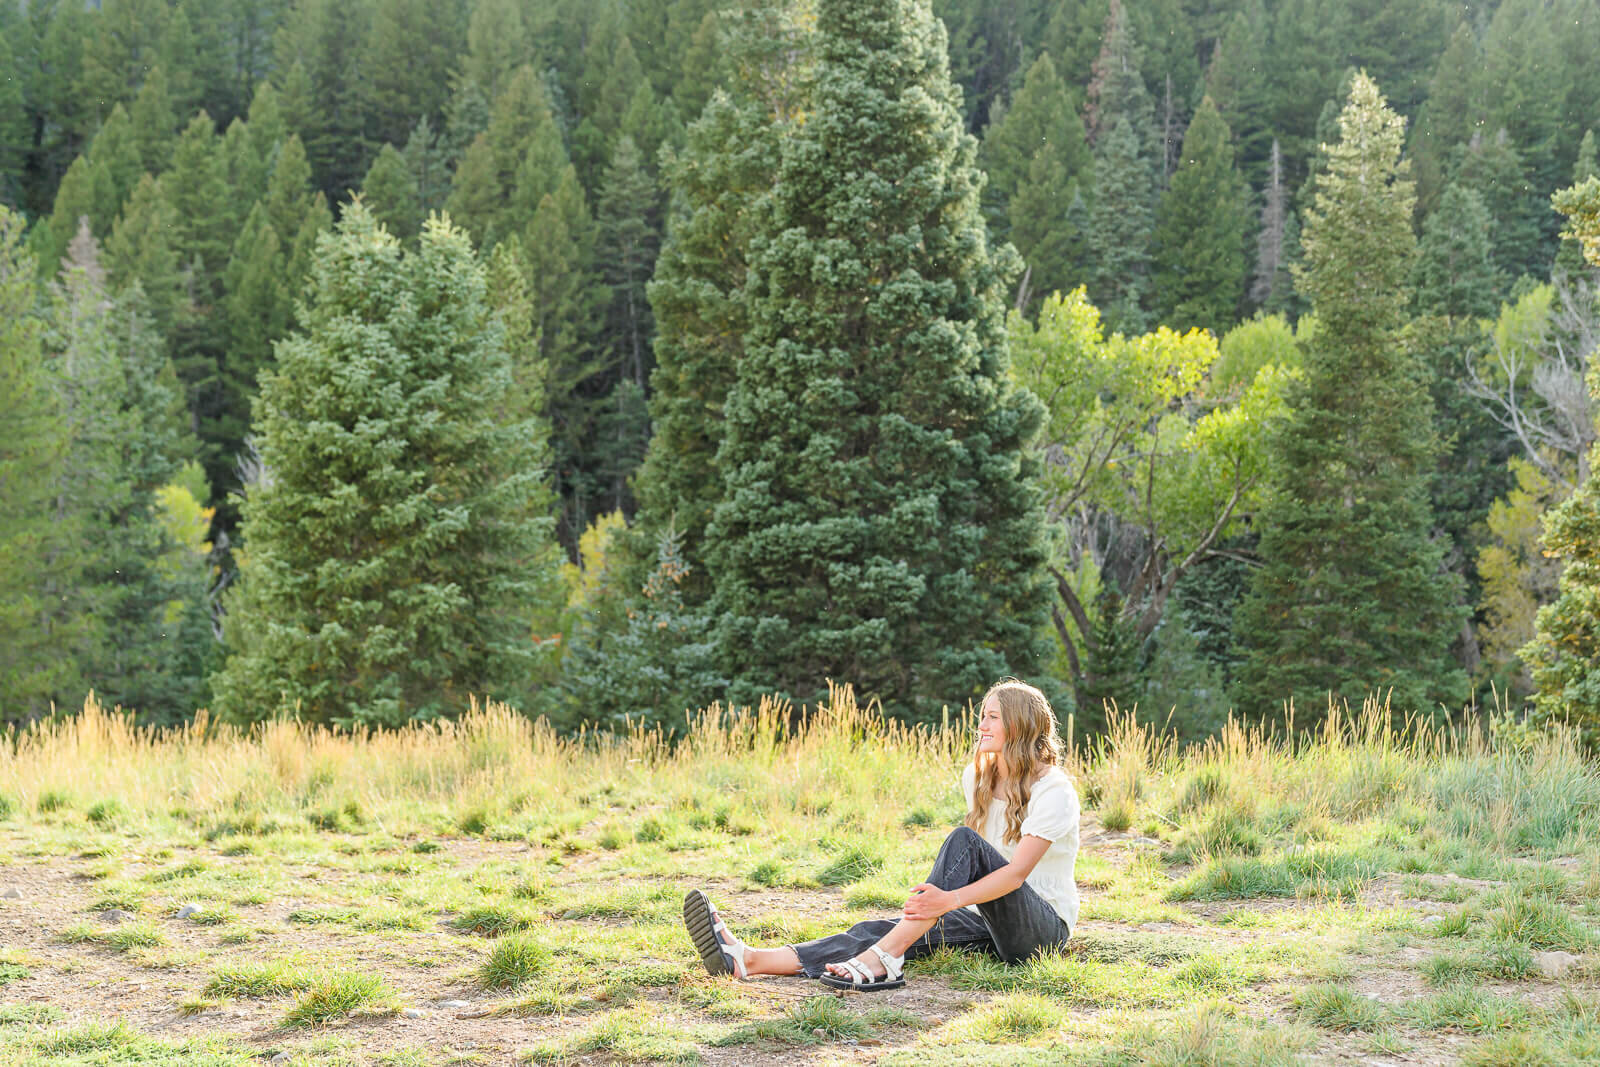 Salt Lake City photography of a high school senior girl wearing a white short sleeved blouse and dark jeans sitting in a grassy field with pine trees in the distance. Photo captured at Tibble Fork Reservoir in the Spring